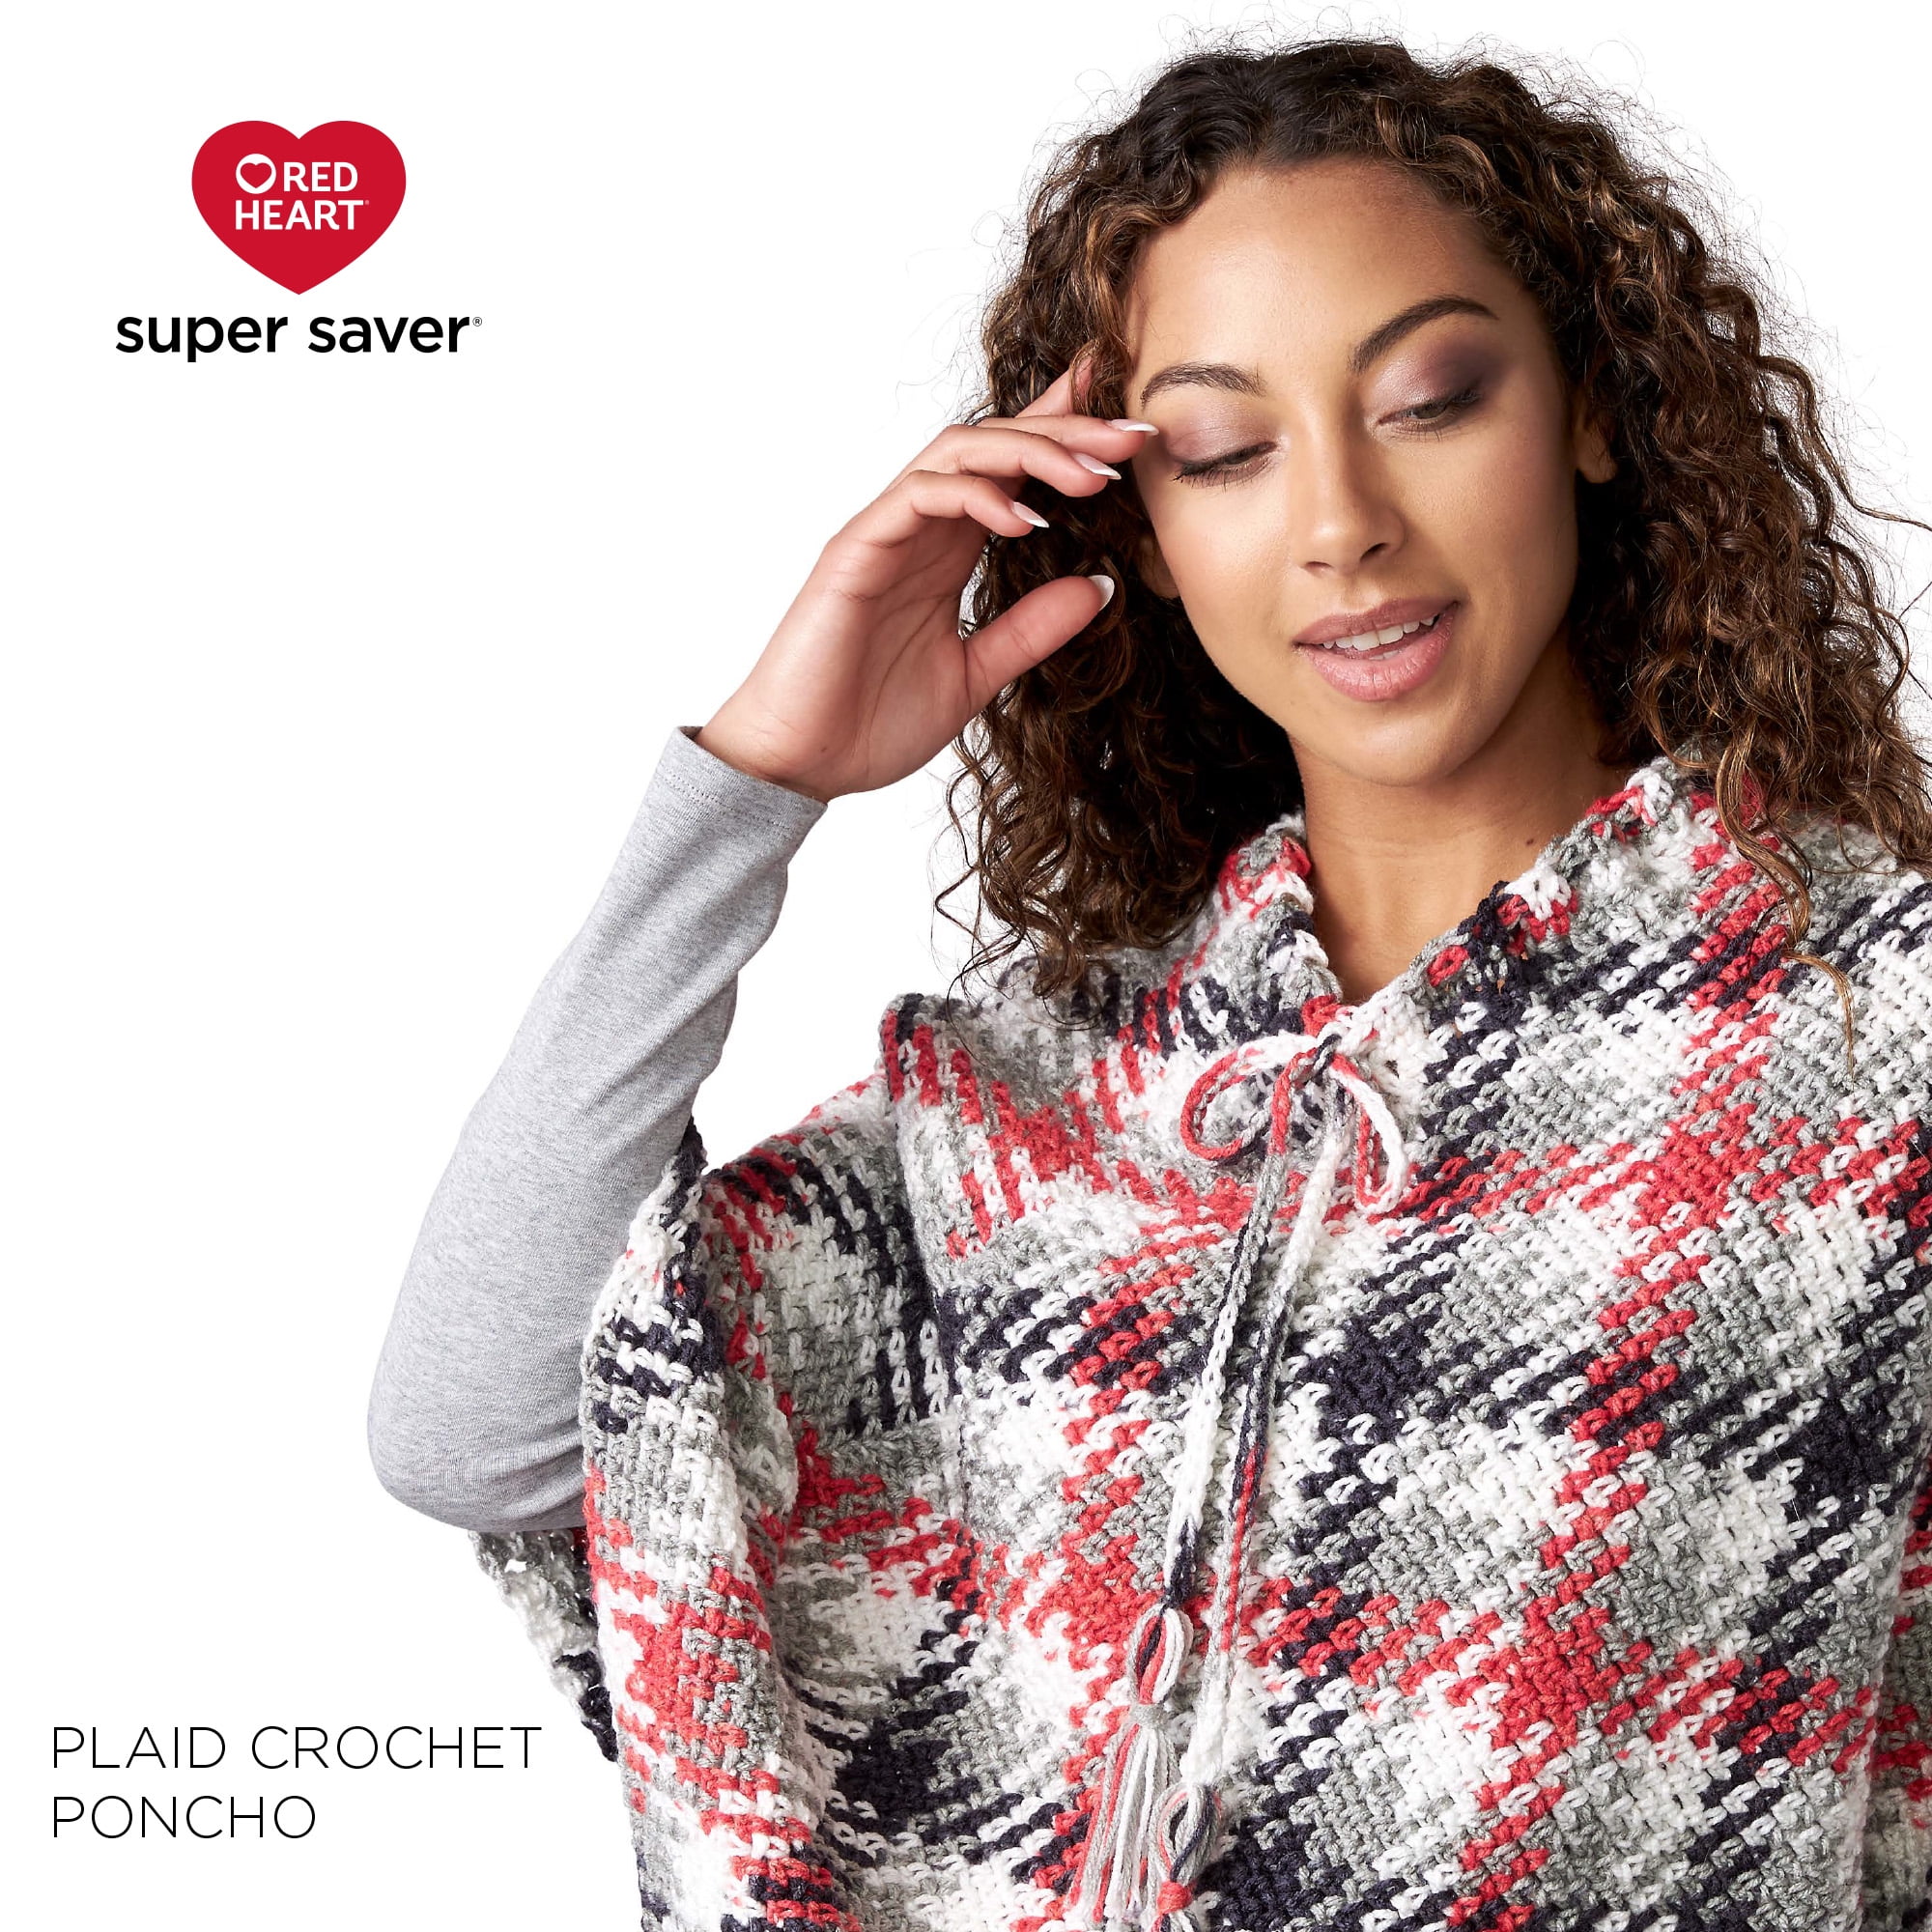 Red Heart Yarn Super Saver Pooling Yarn E300P – Good's Store Online